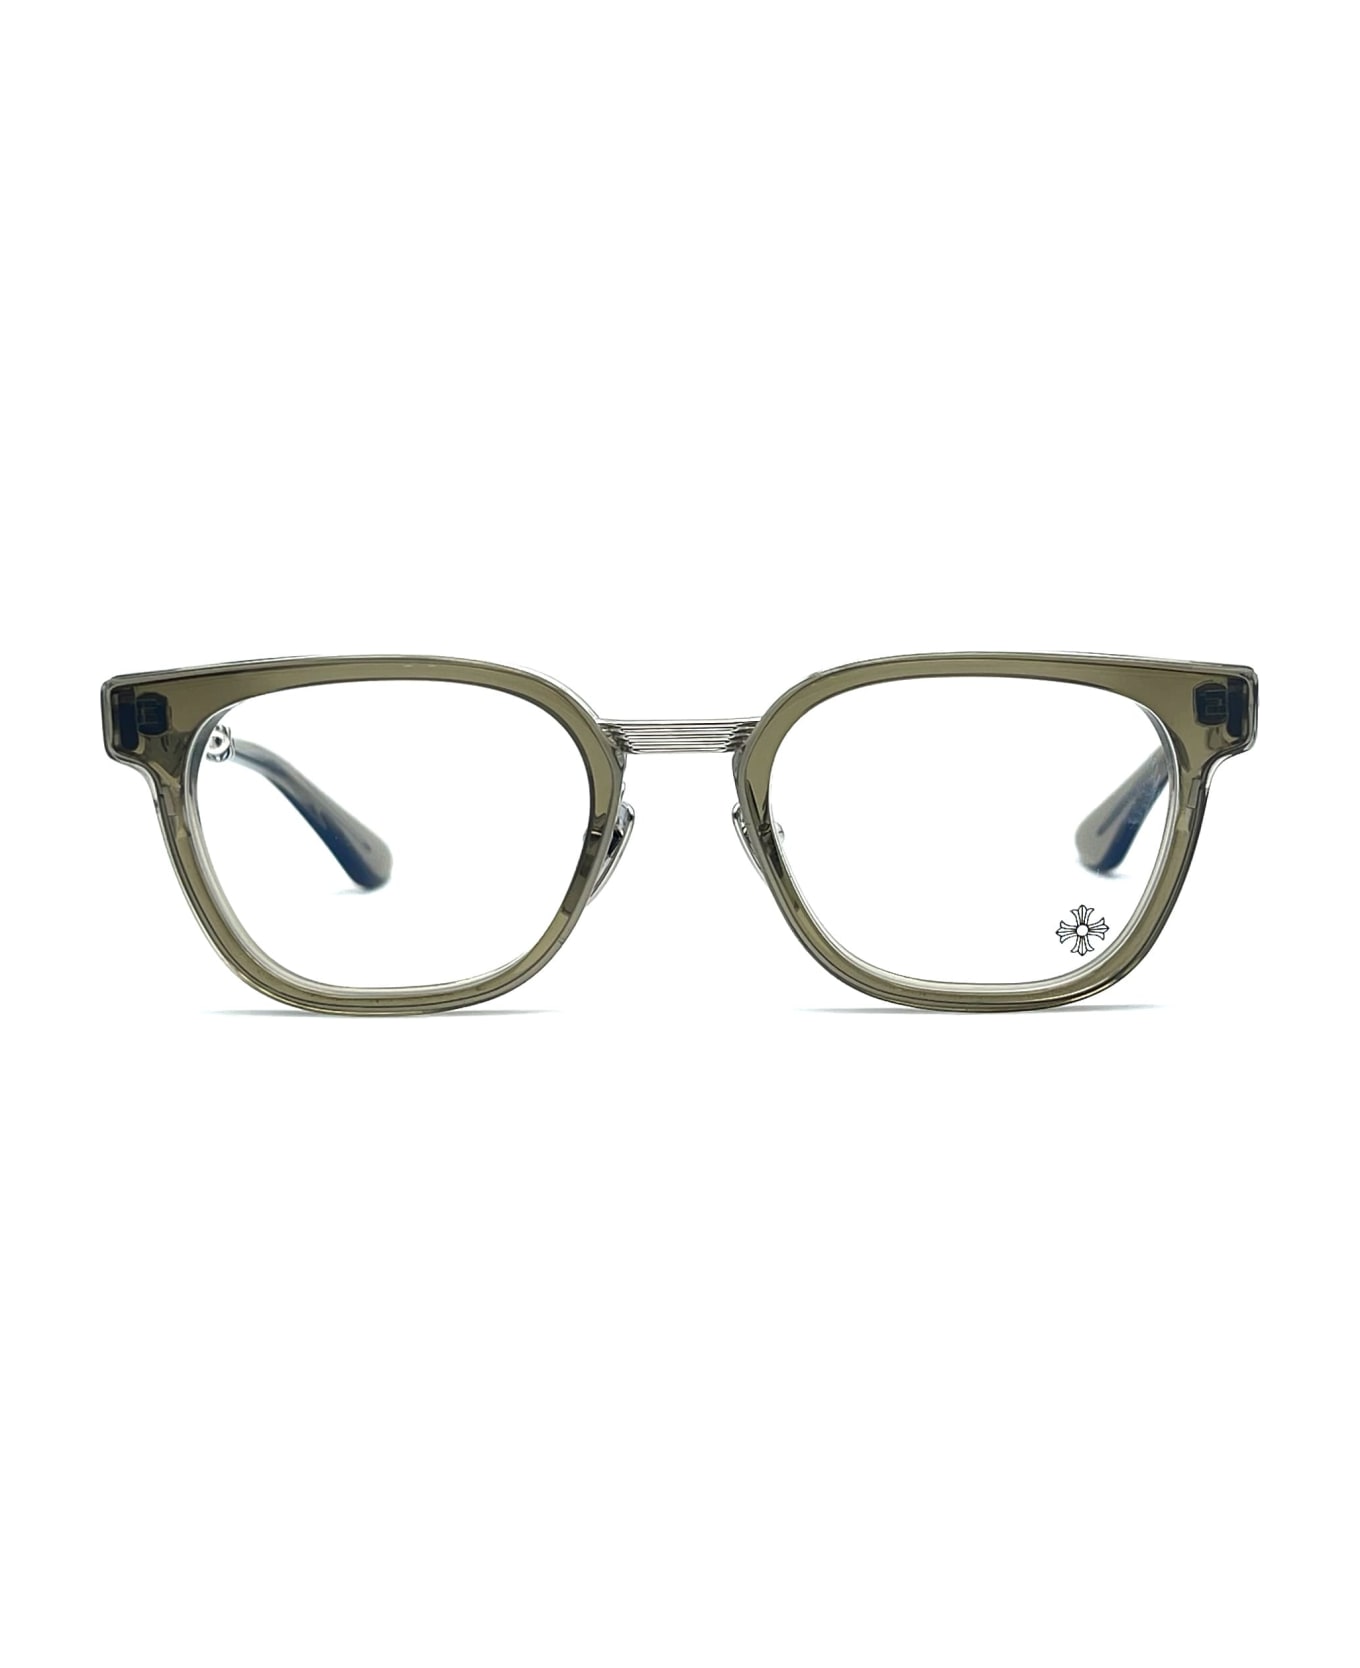 Chrome Hearts Duck Butter - Army / Shiny Silver Rx Glasses - olive green